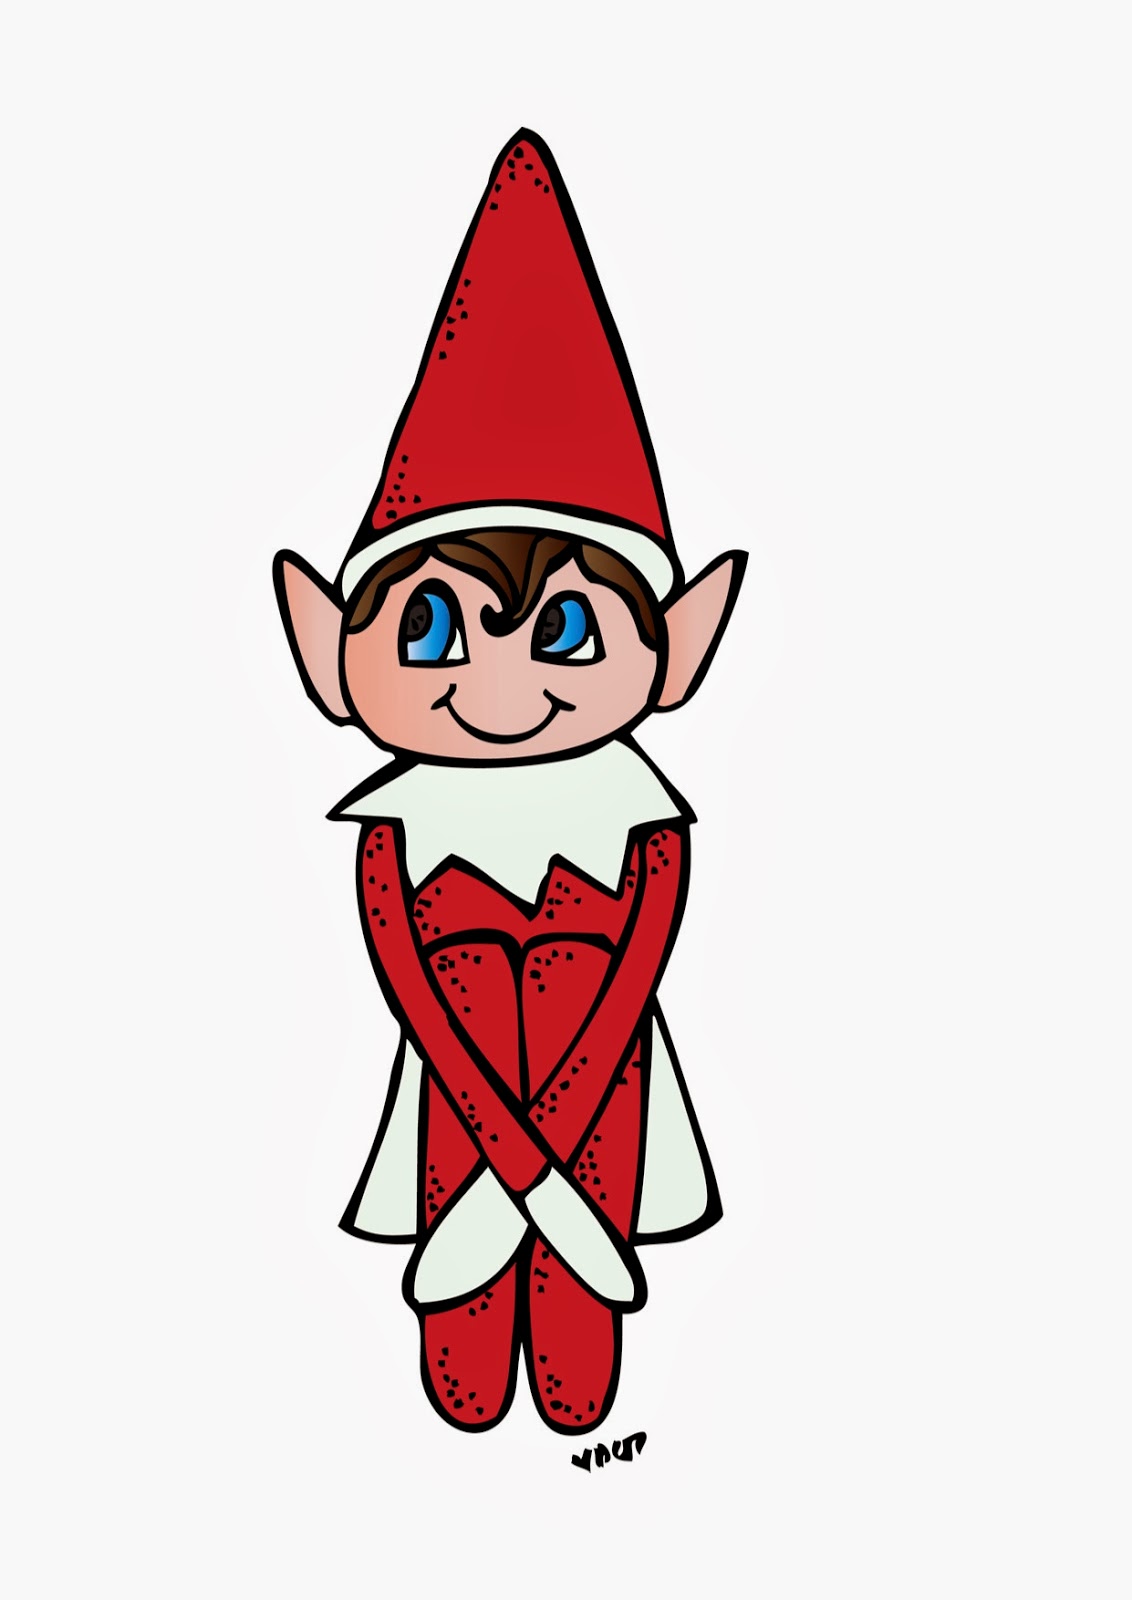 Free Elf On A Shelf Png, Download Free Elf On A Shelf Png png images ...